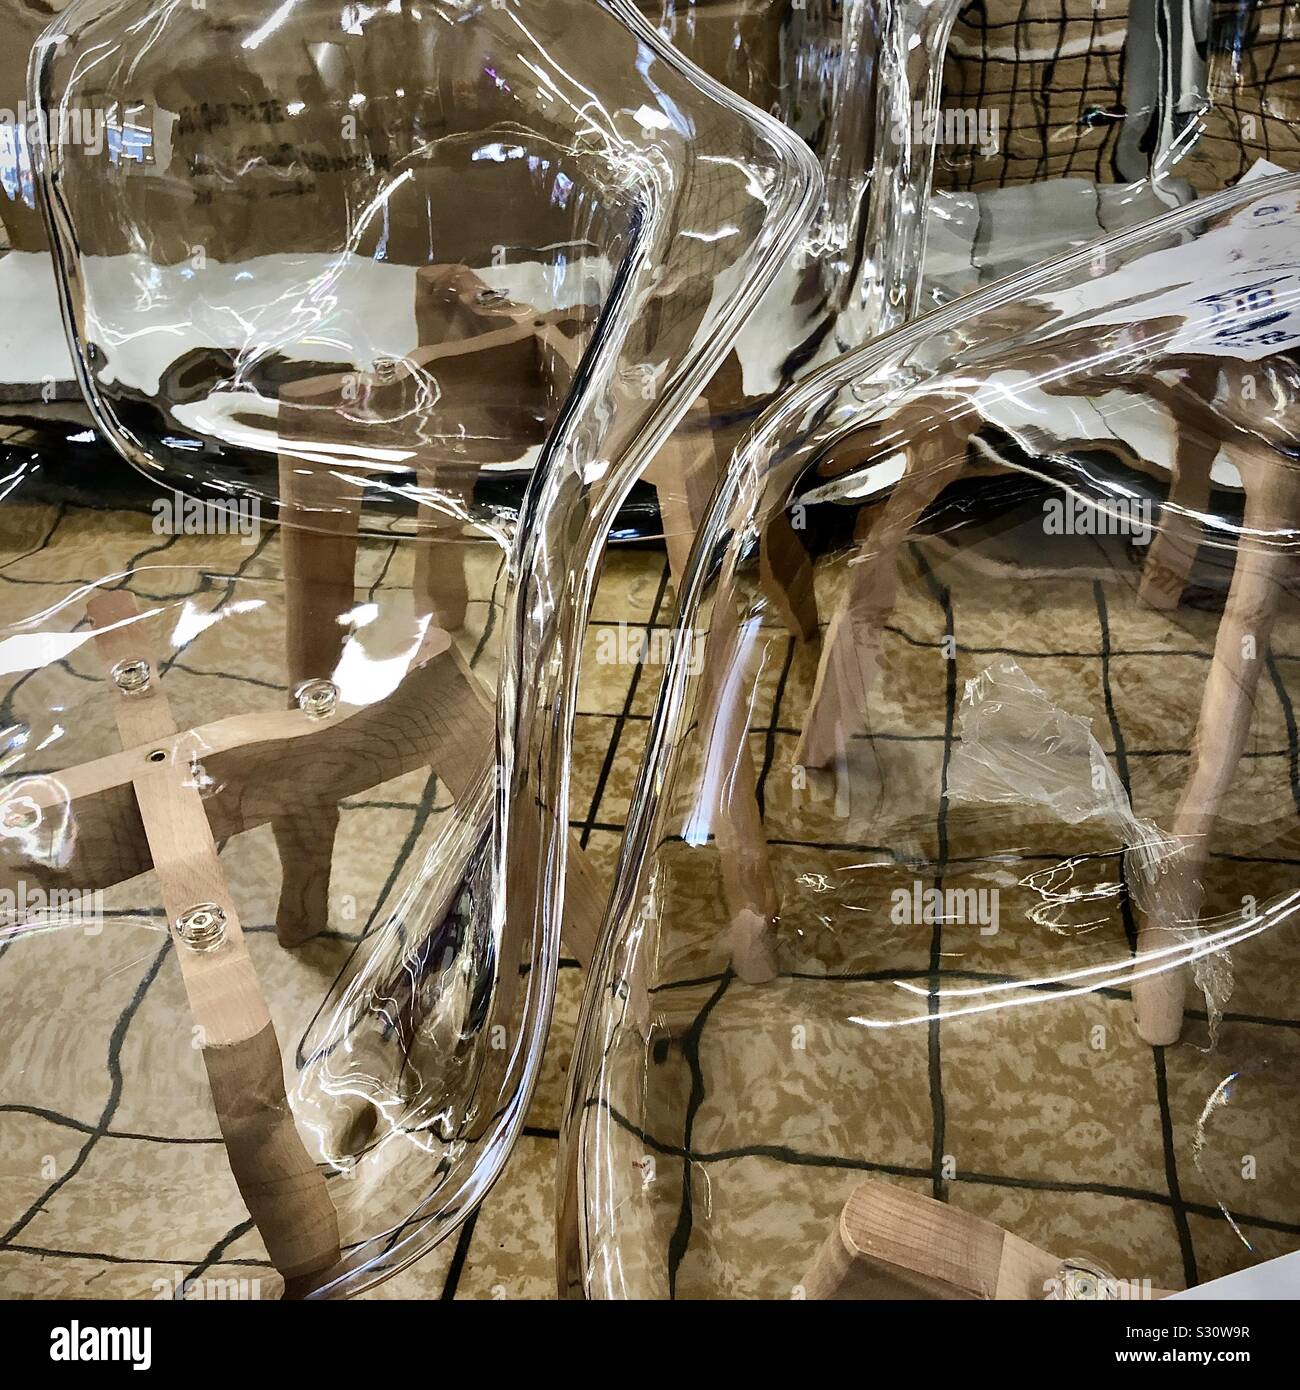 Distorted view of transparent plastic chairs. Stock Photo